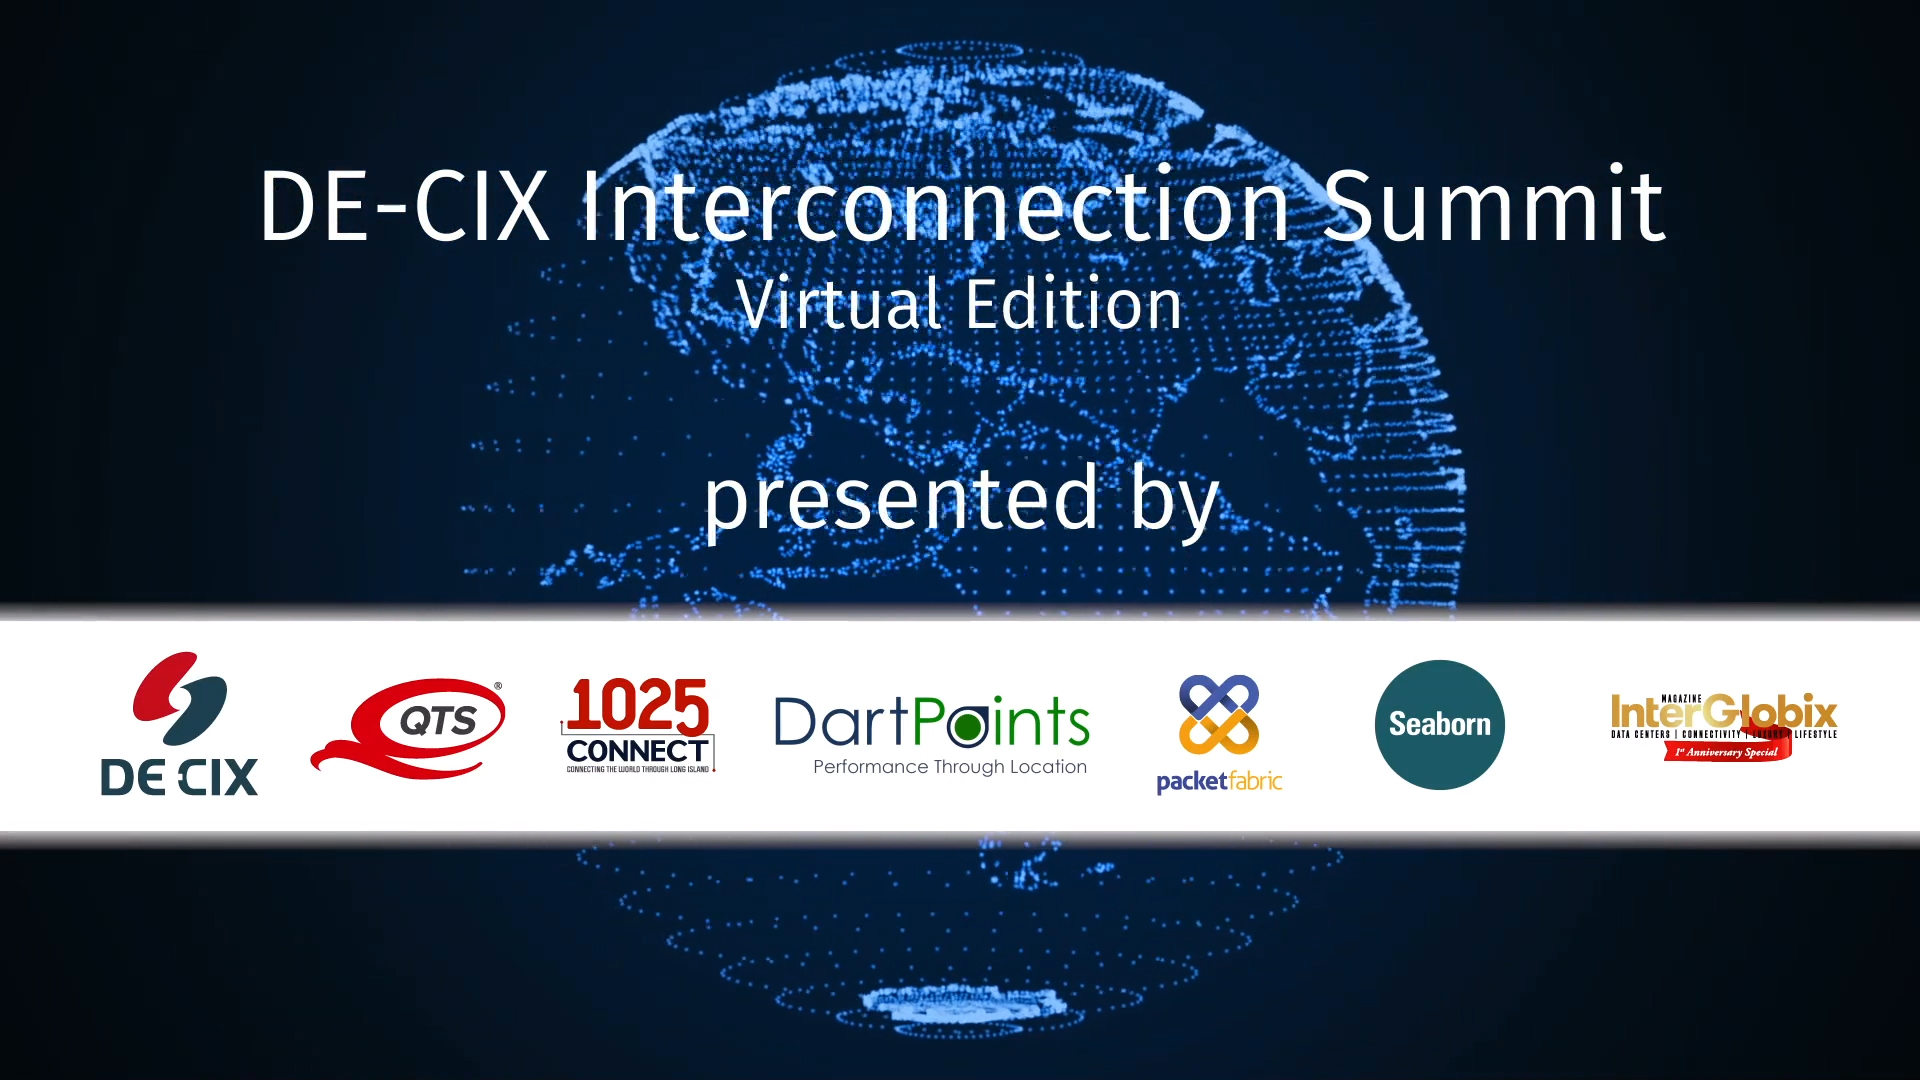 DE-CIX North America Interconnection Summit hosted in our virtual arena - December 16, 2020 at 12pm ET. Summit to highlight interconnection enabling digital transformation throughout North America. Featuring 14 speakers from 1025Connect, Akamai, DartPoints, DE-CIX, Digital Realty, Gartner, Hilton, PacketFabric, QTS Datacenters, RVA-IX, Seaborn, Subspace, and Uber - representing the entire North American enterprise, data center, networking and subsea cable ecosystem. Breaking news and more. Registration is free.